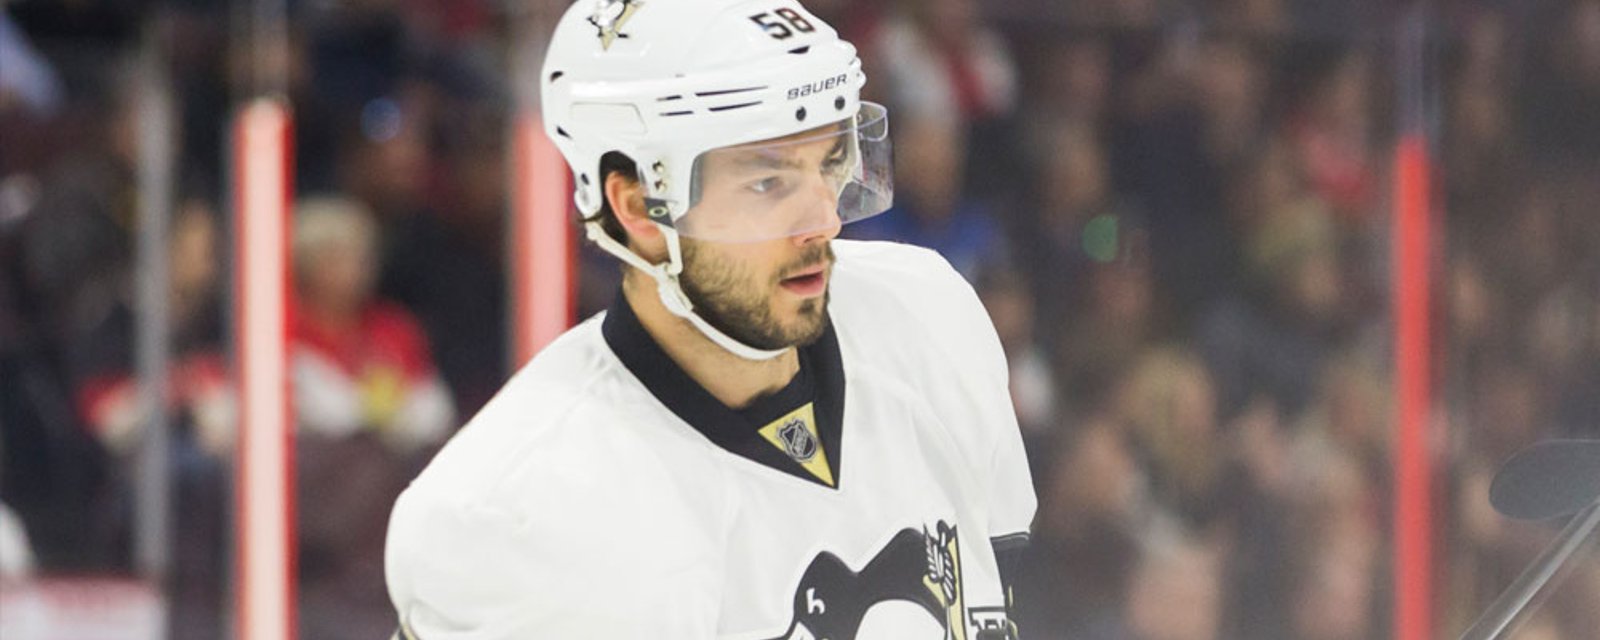 Rumor: Letang situation forcing Penguins into trade talks